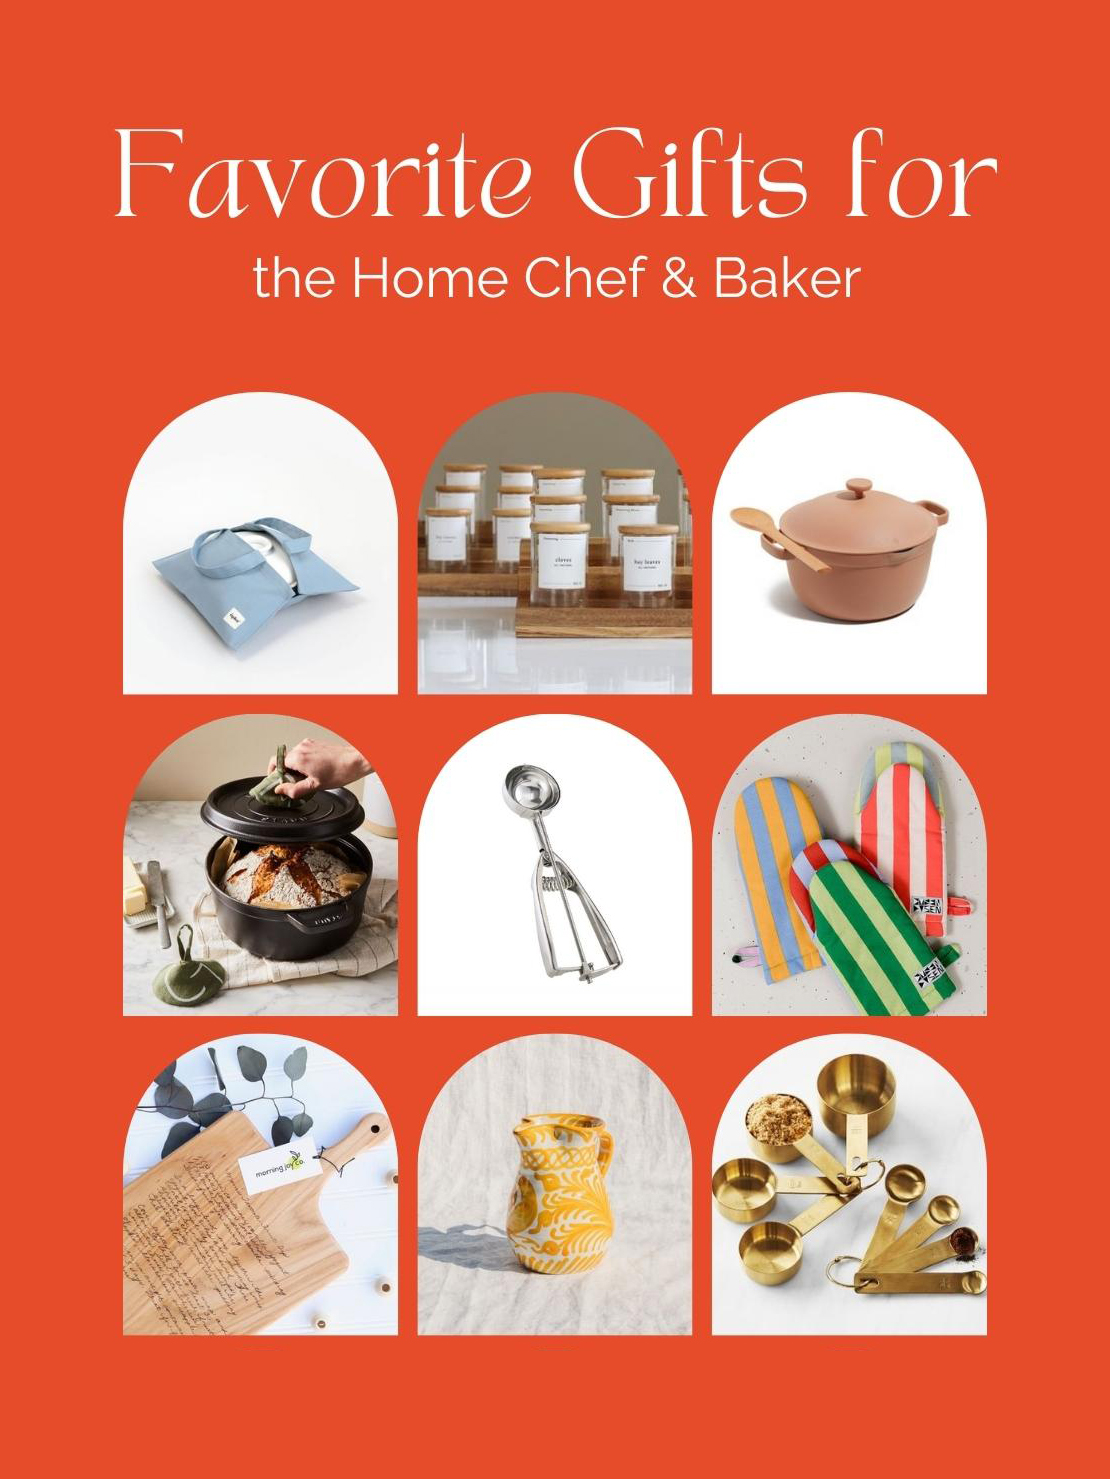 Gifts for Home Chefs & Bakers - Studio DIY